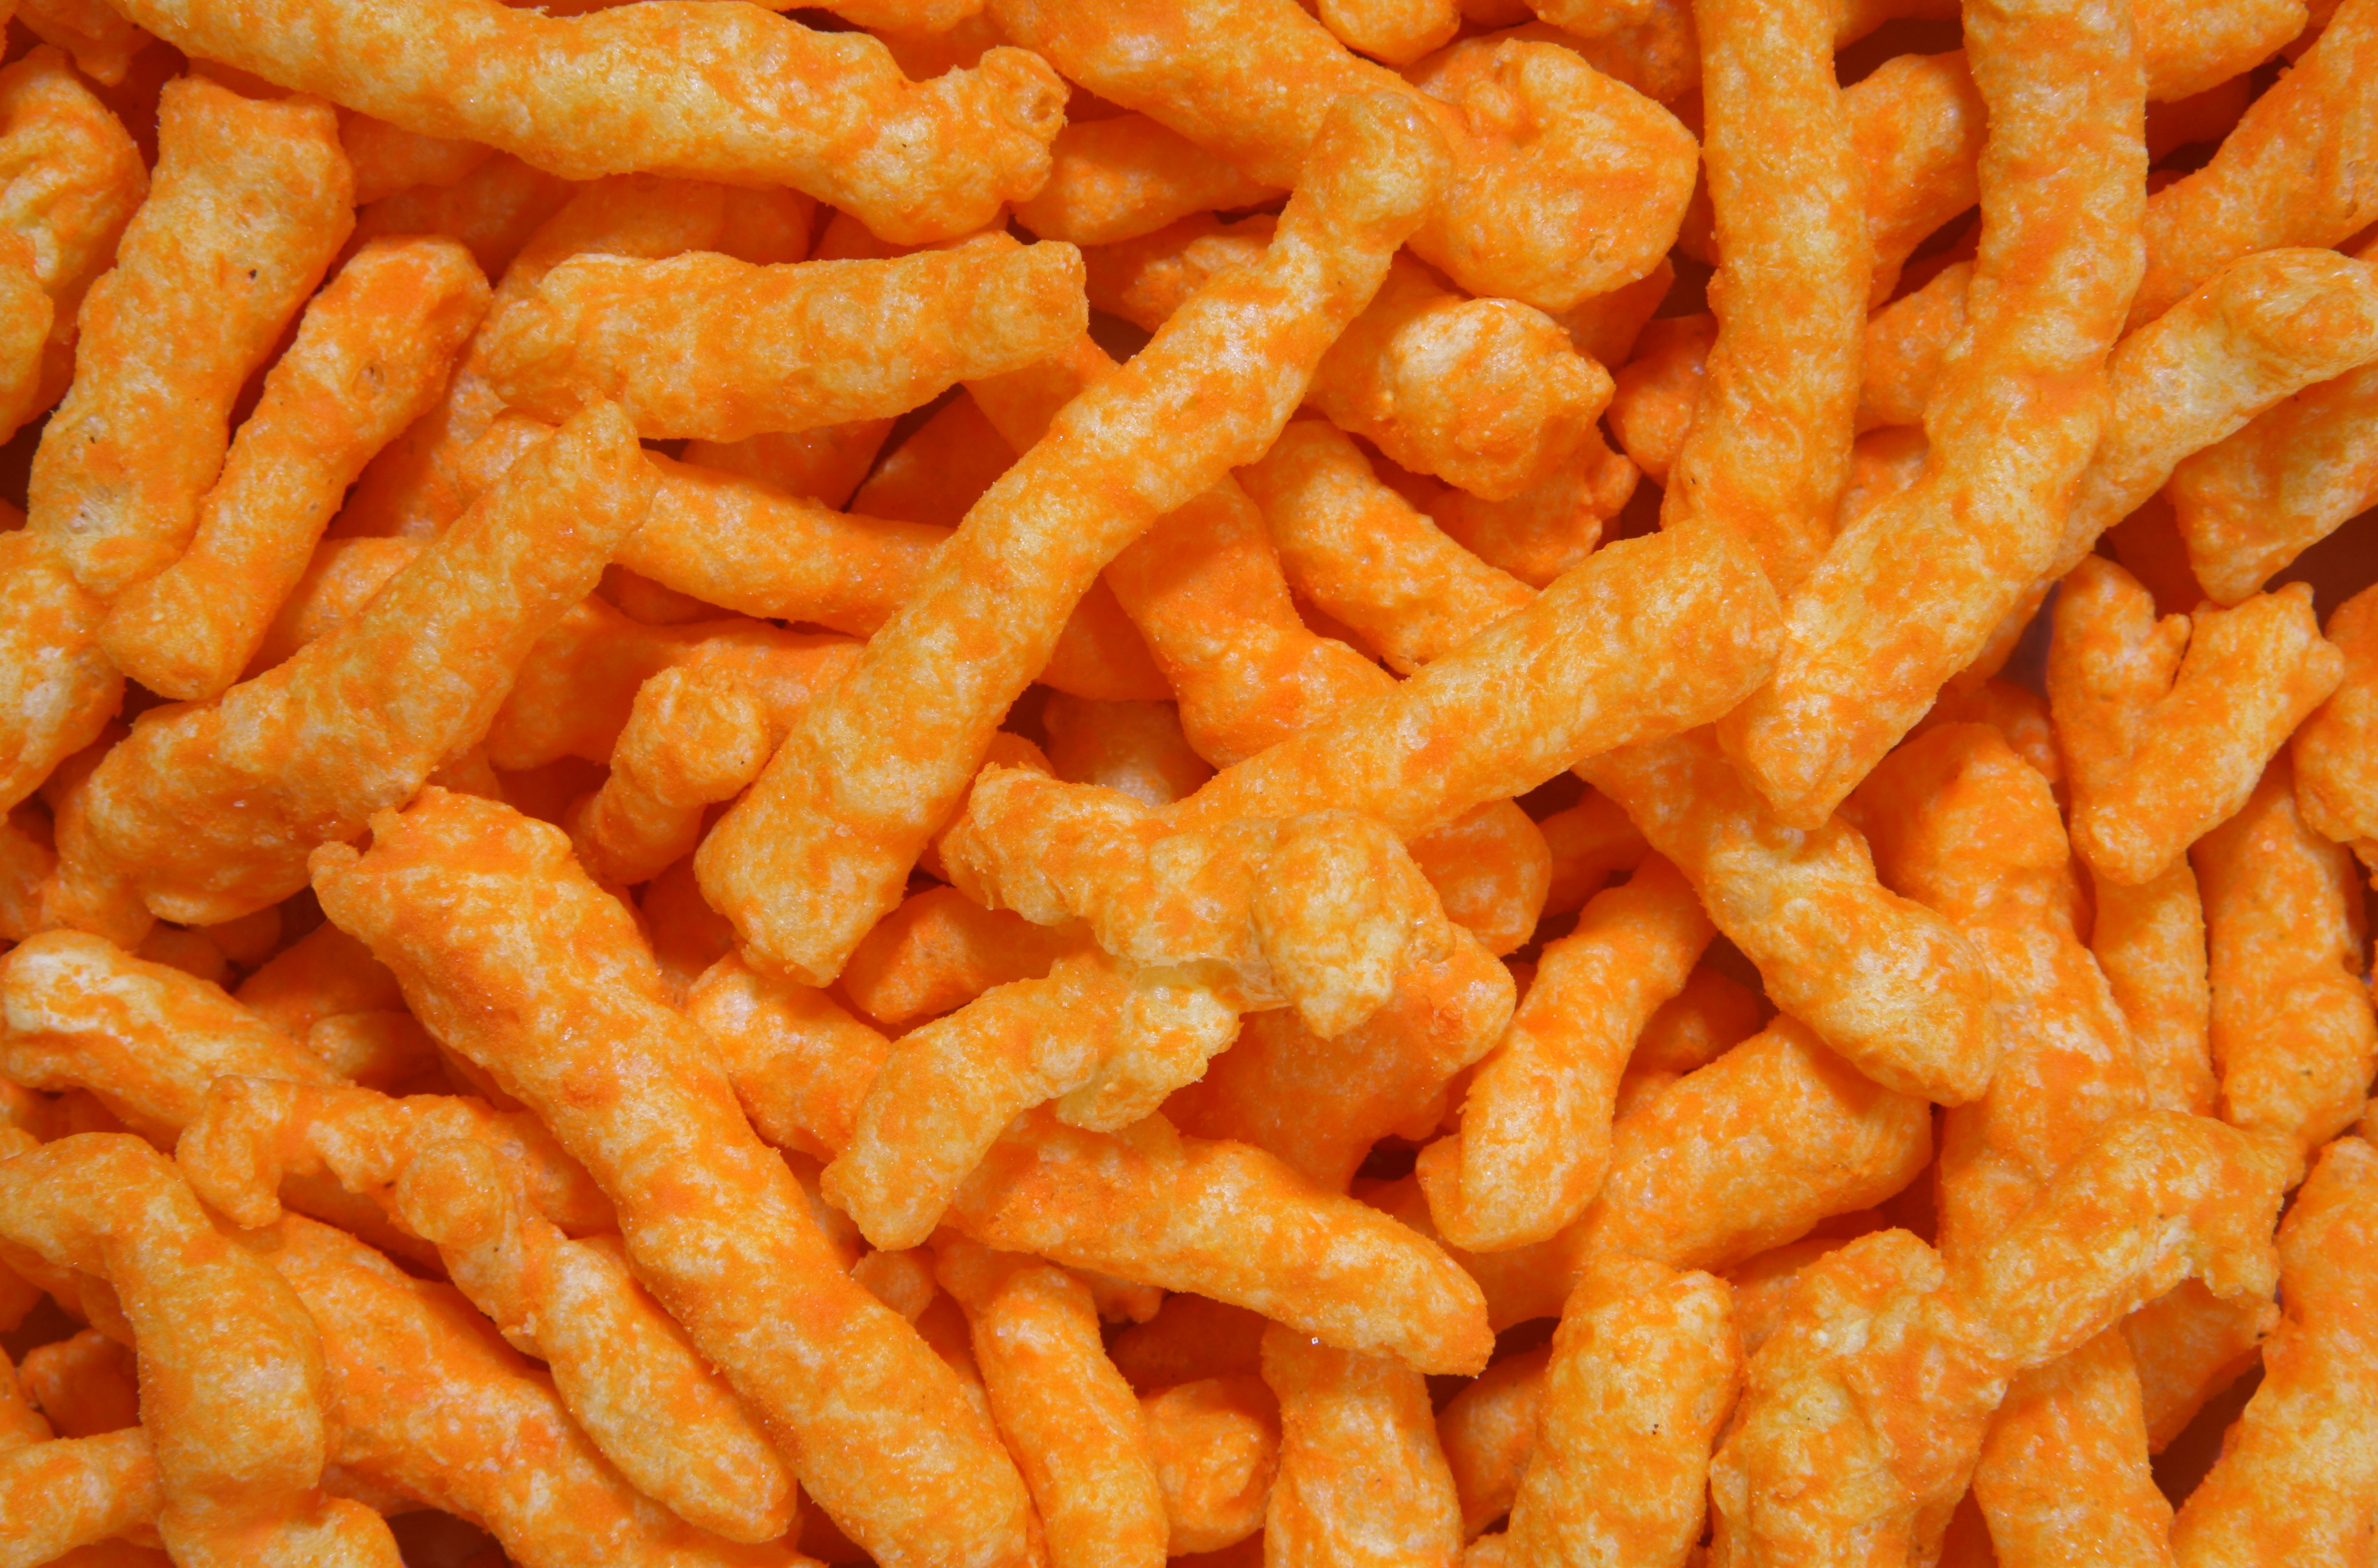 Man sentenced to jail after using Cheetos to set exs home on fire